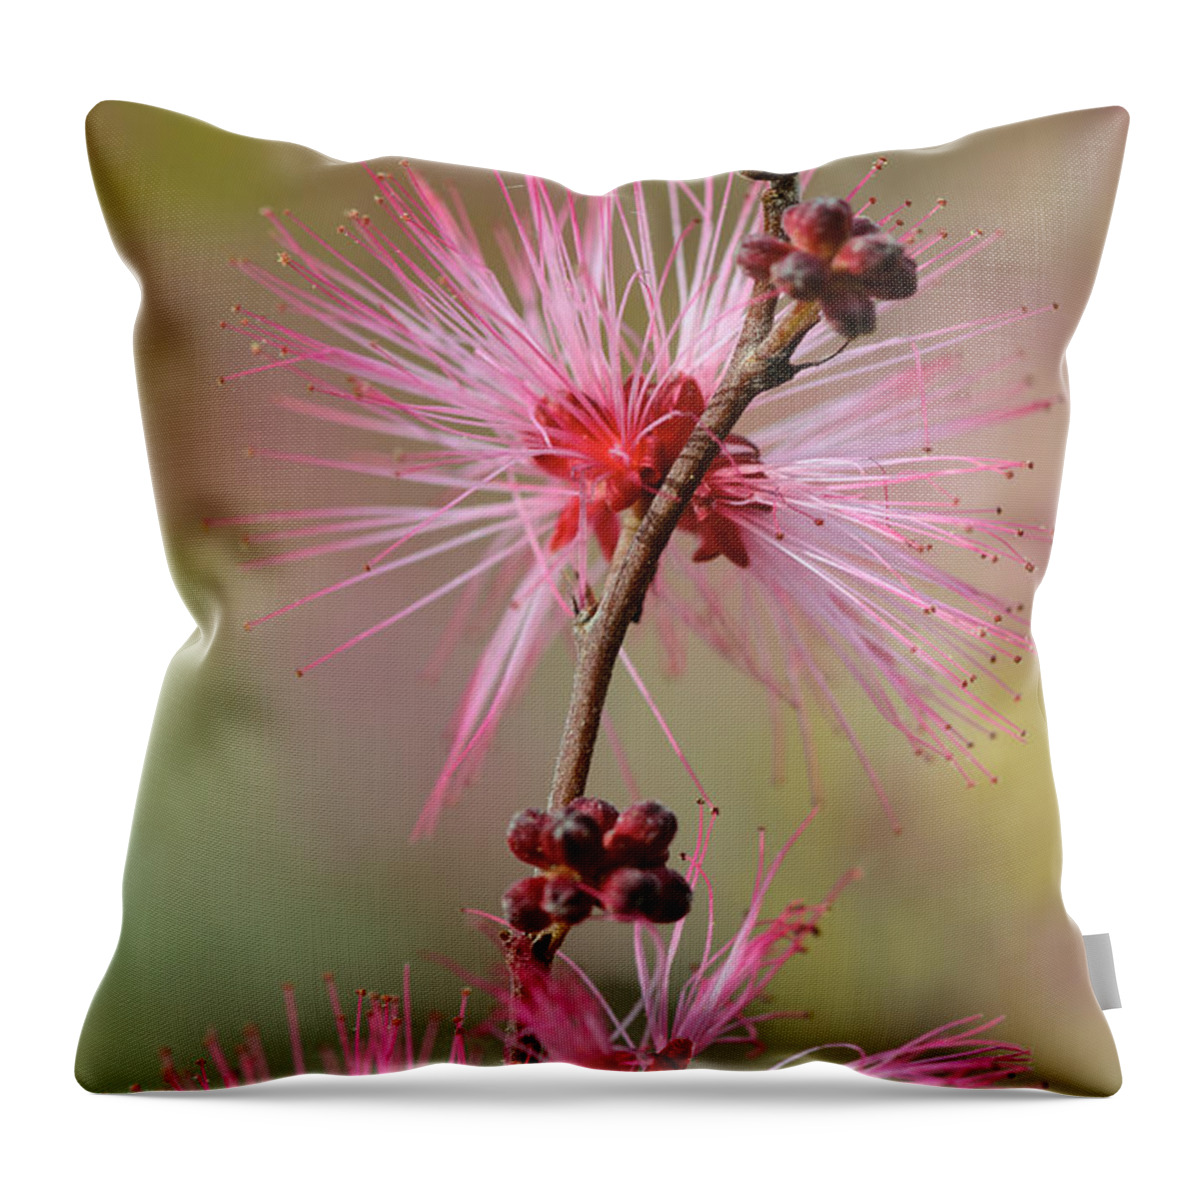 Fairy Duster Throw Pillow featuring the photograph Fairy Duster by Tamara Becker